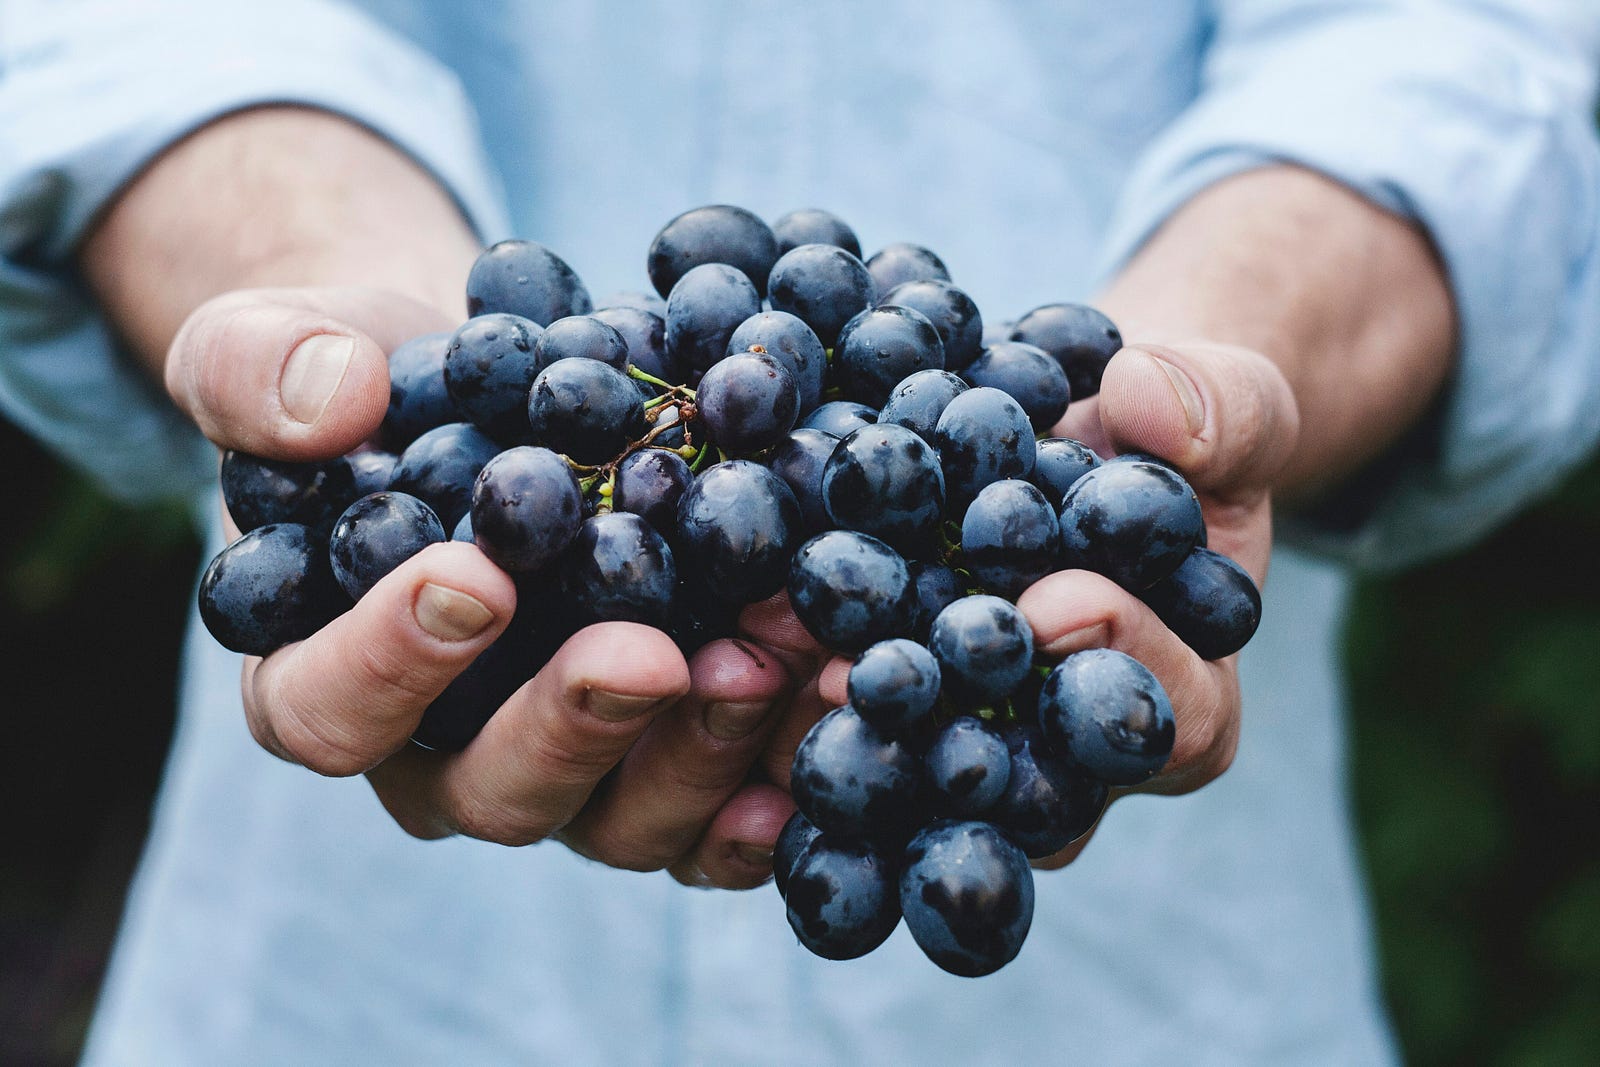 A person reaches out their hands, filled with dark purple grapes.